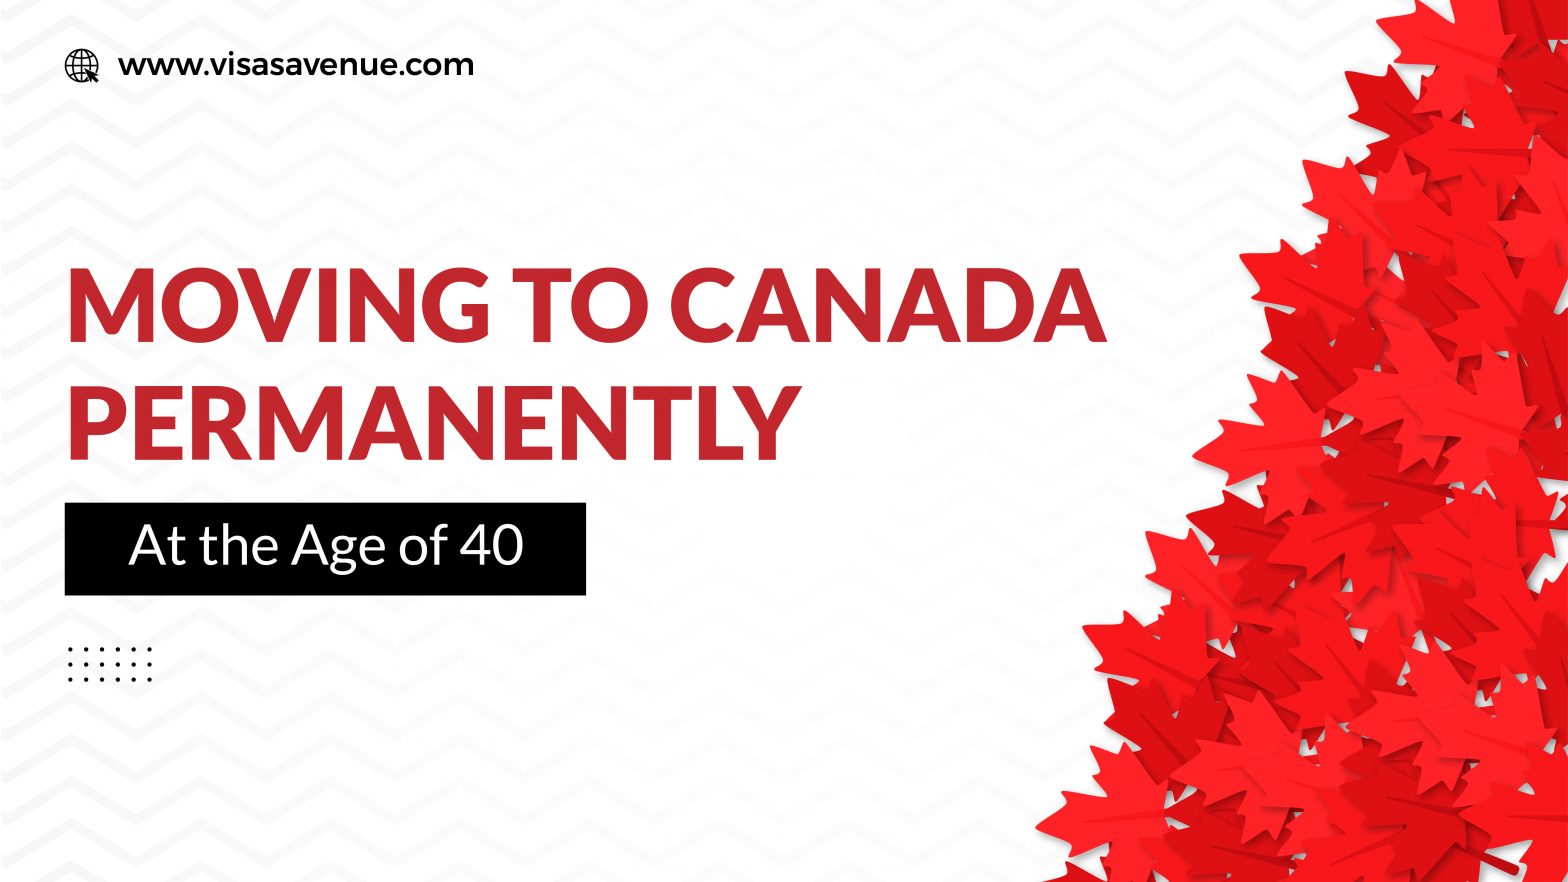 Moving to Canada Permanently at the Age of 40